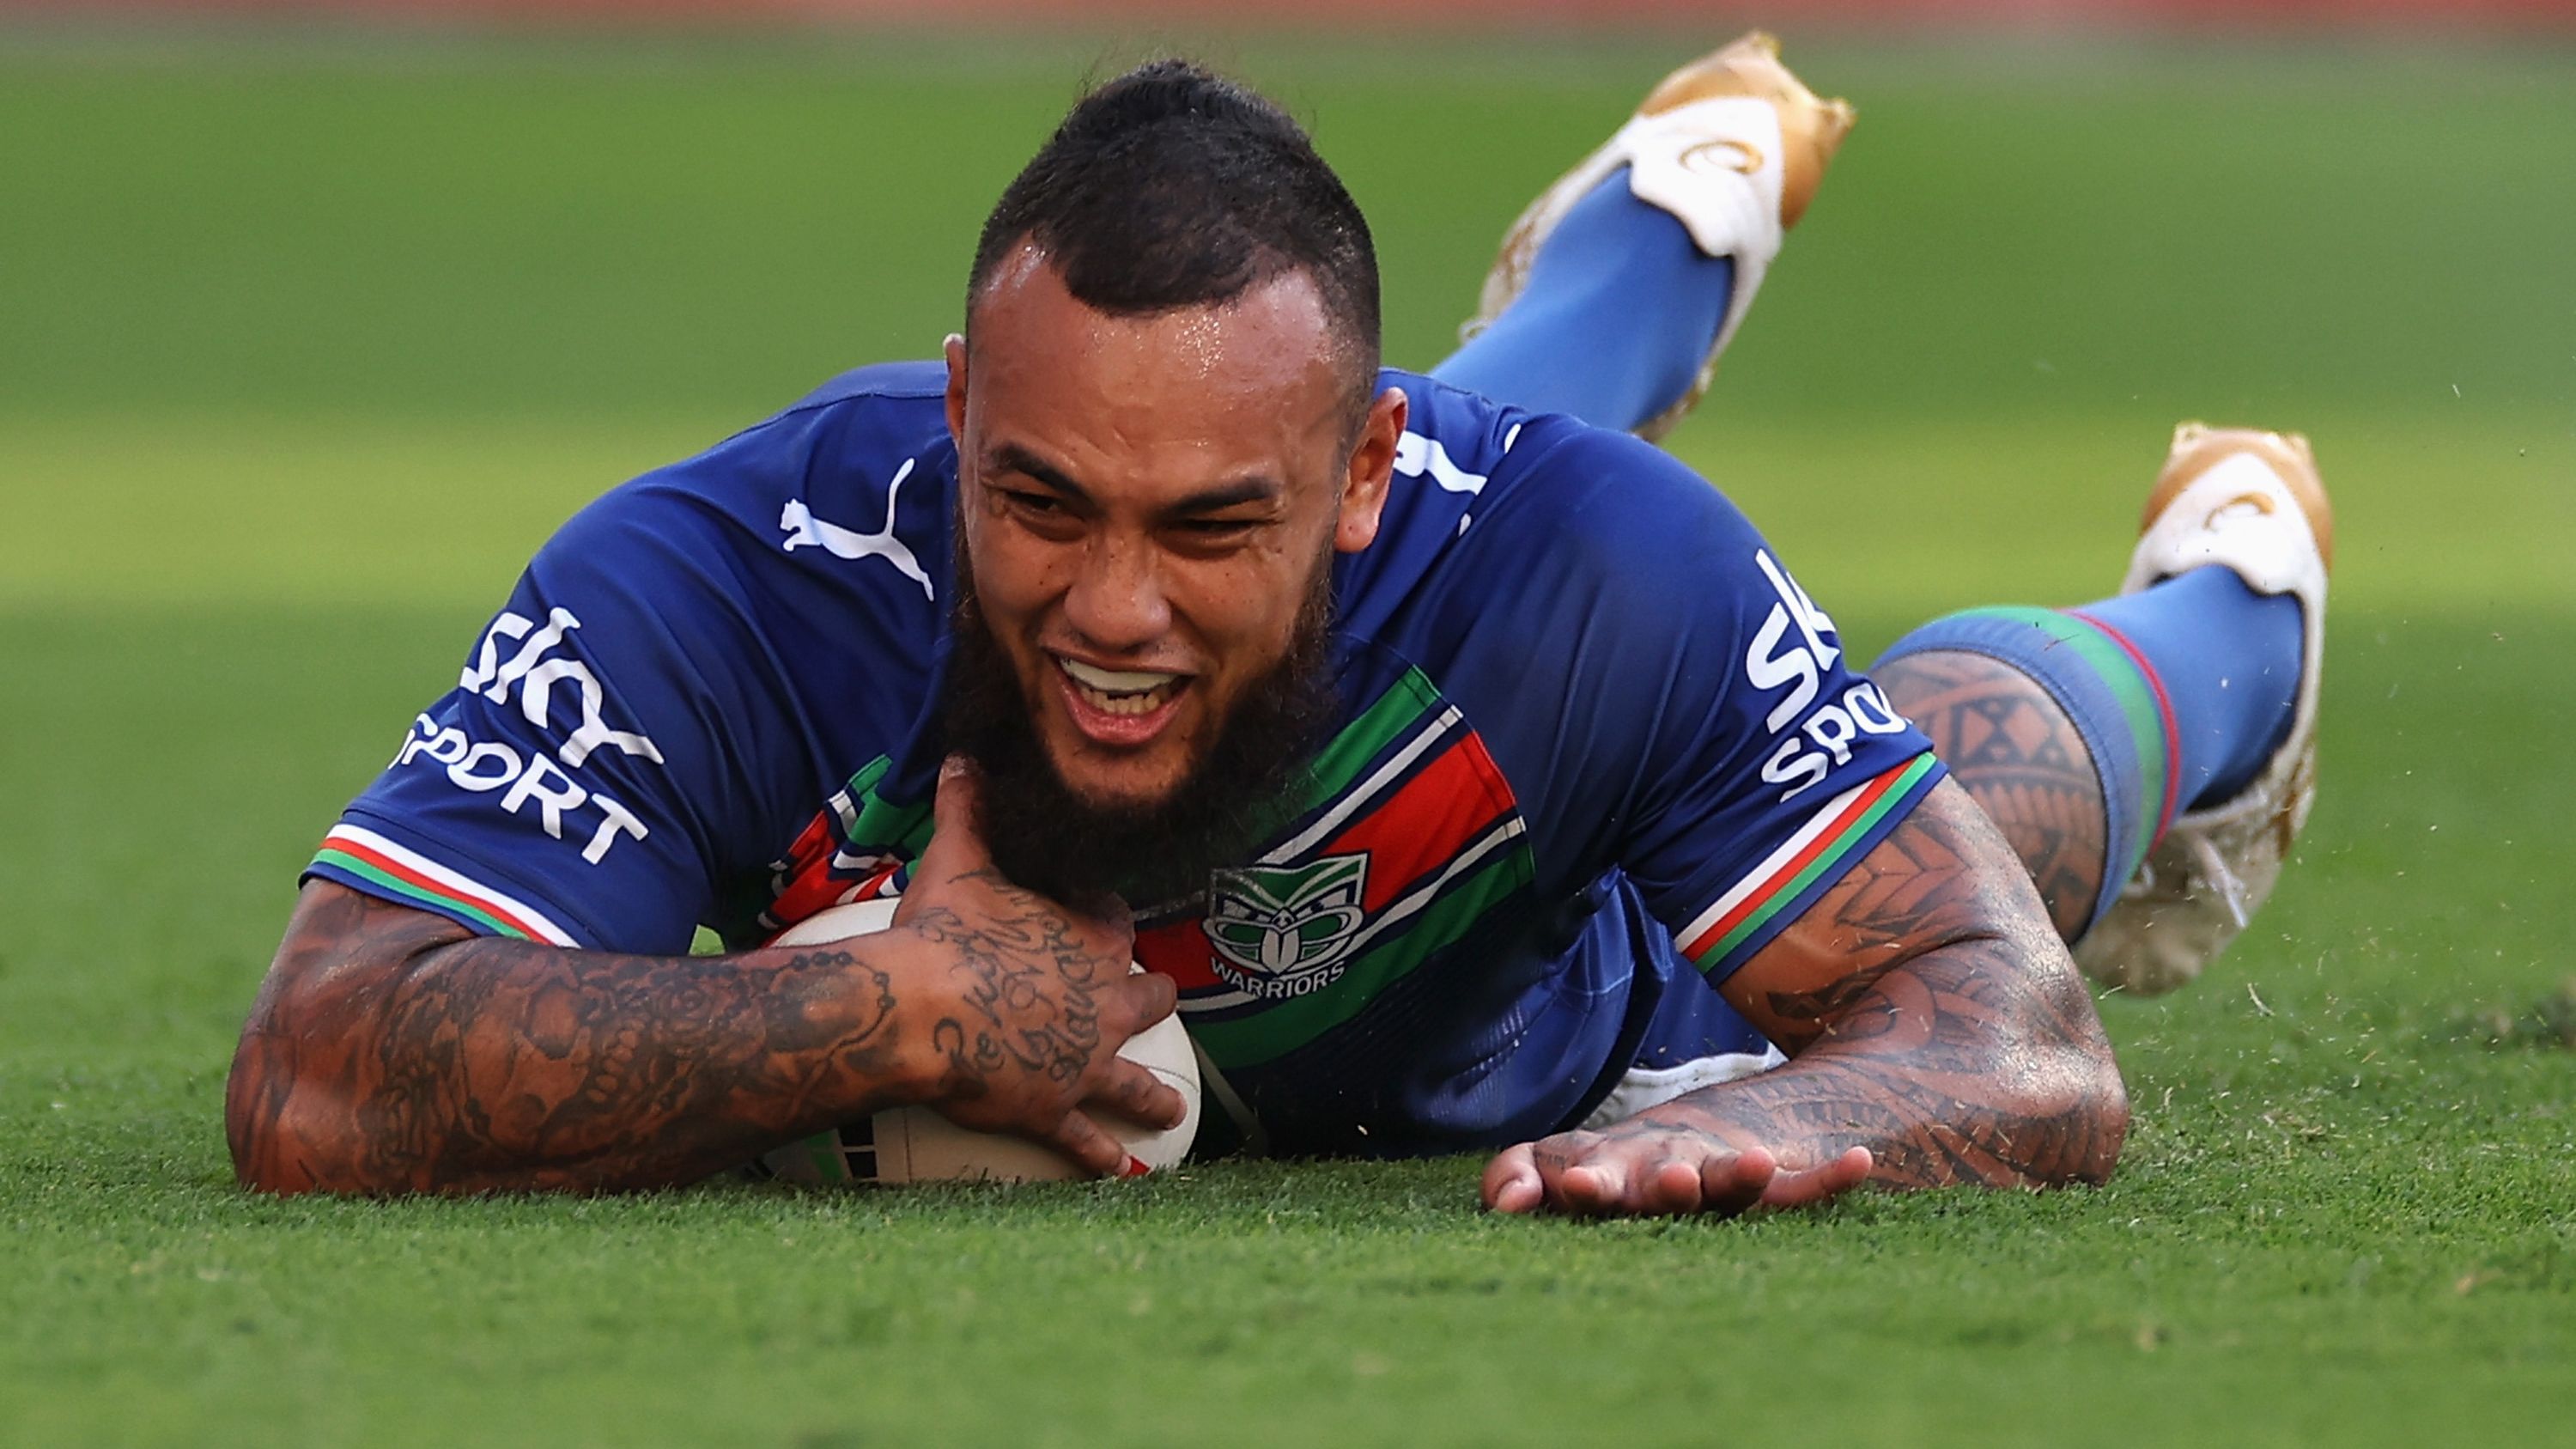 Addin Fonua-Blake of the Warriors scores a try during the round 10 NRL match between the New Zealand Warriors and Penrith Panthers at Suncorp Stadium on May 06, 2023 in Brisbane, Australia. (Photo by Cameron Spencer/Getty Images)